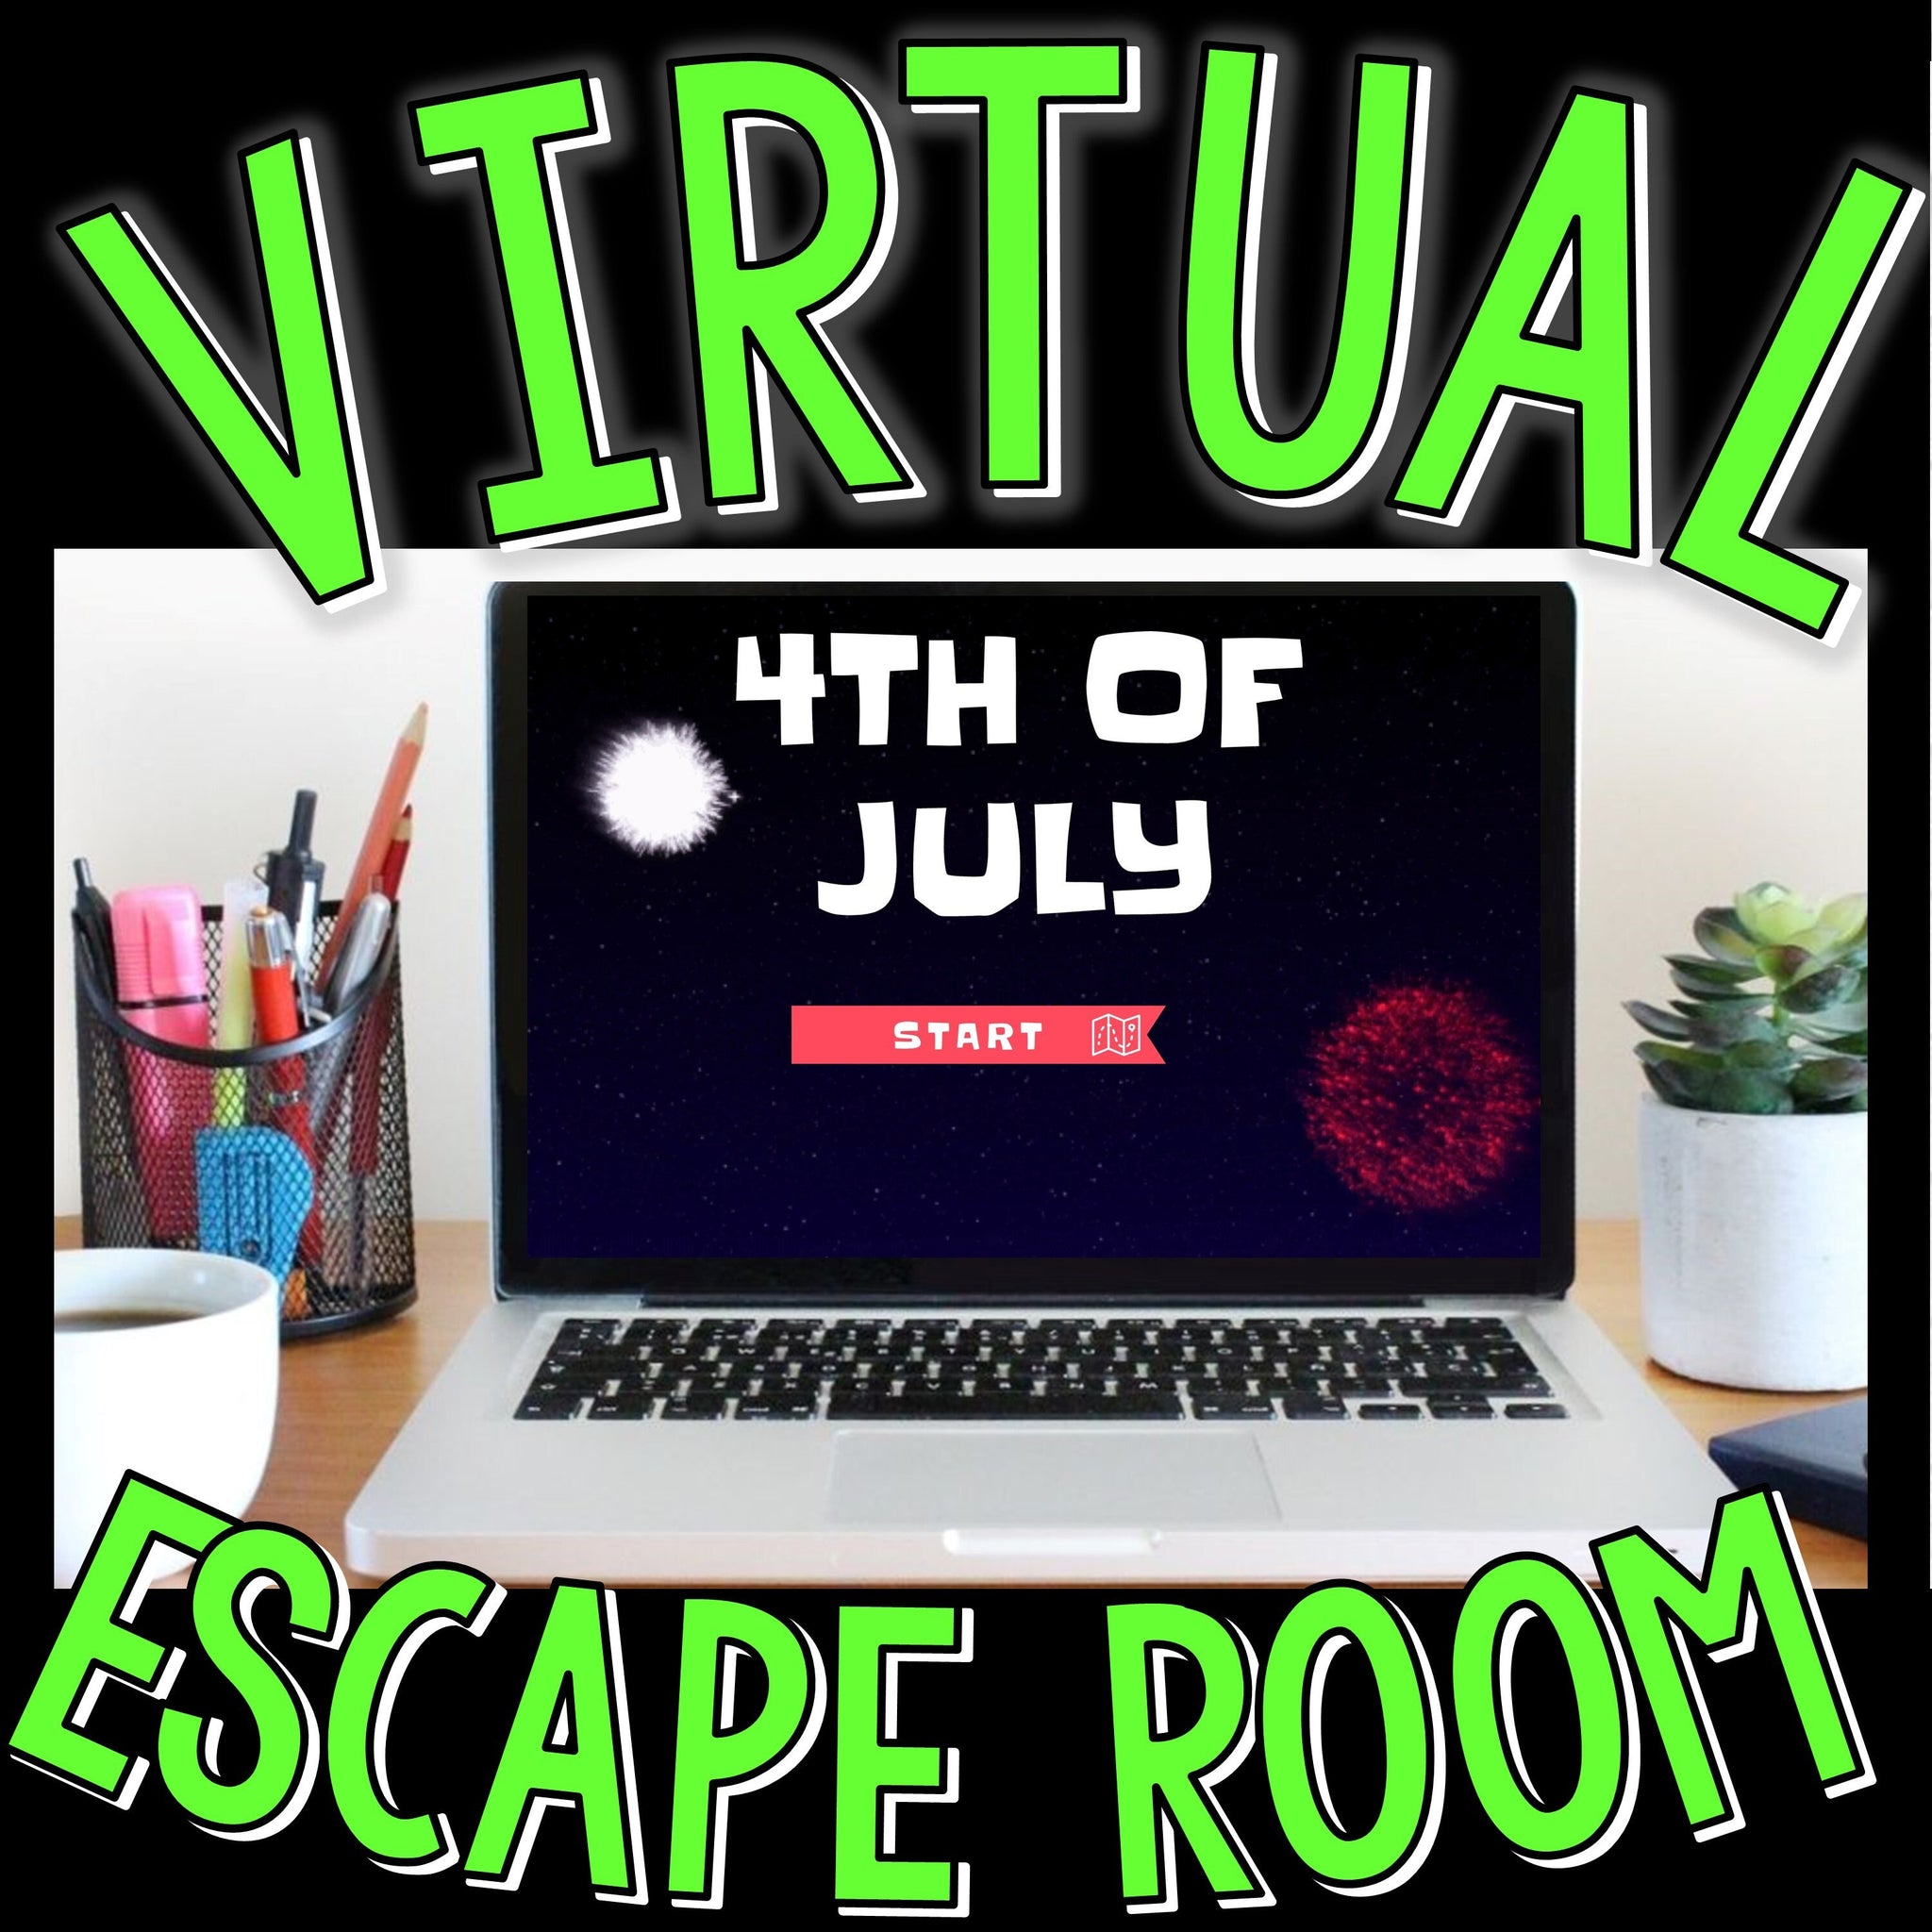 Virtual Escape Room For Kids 4th Of July